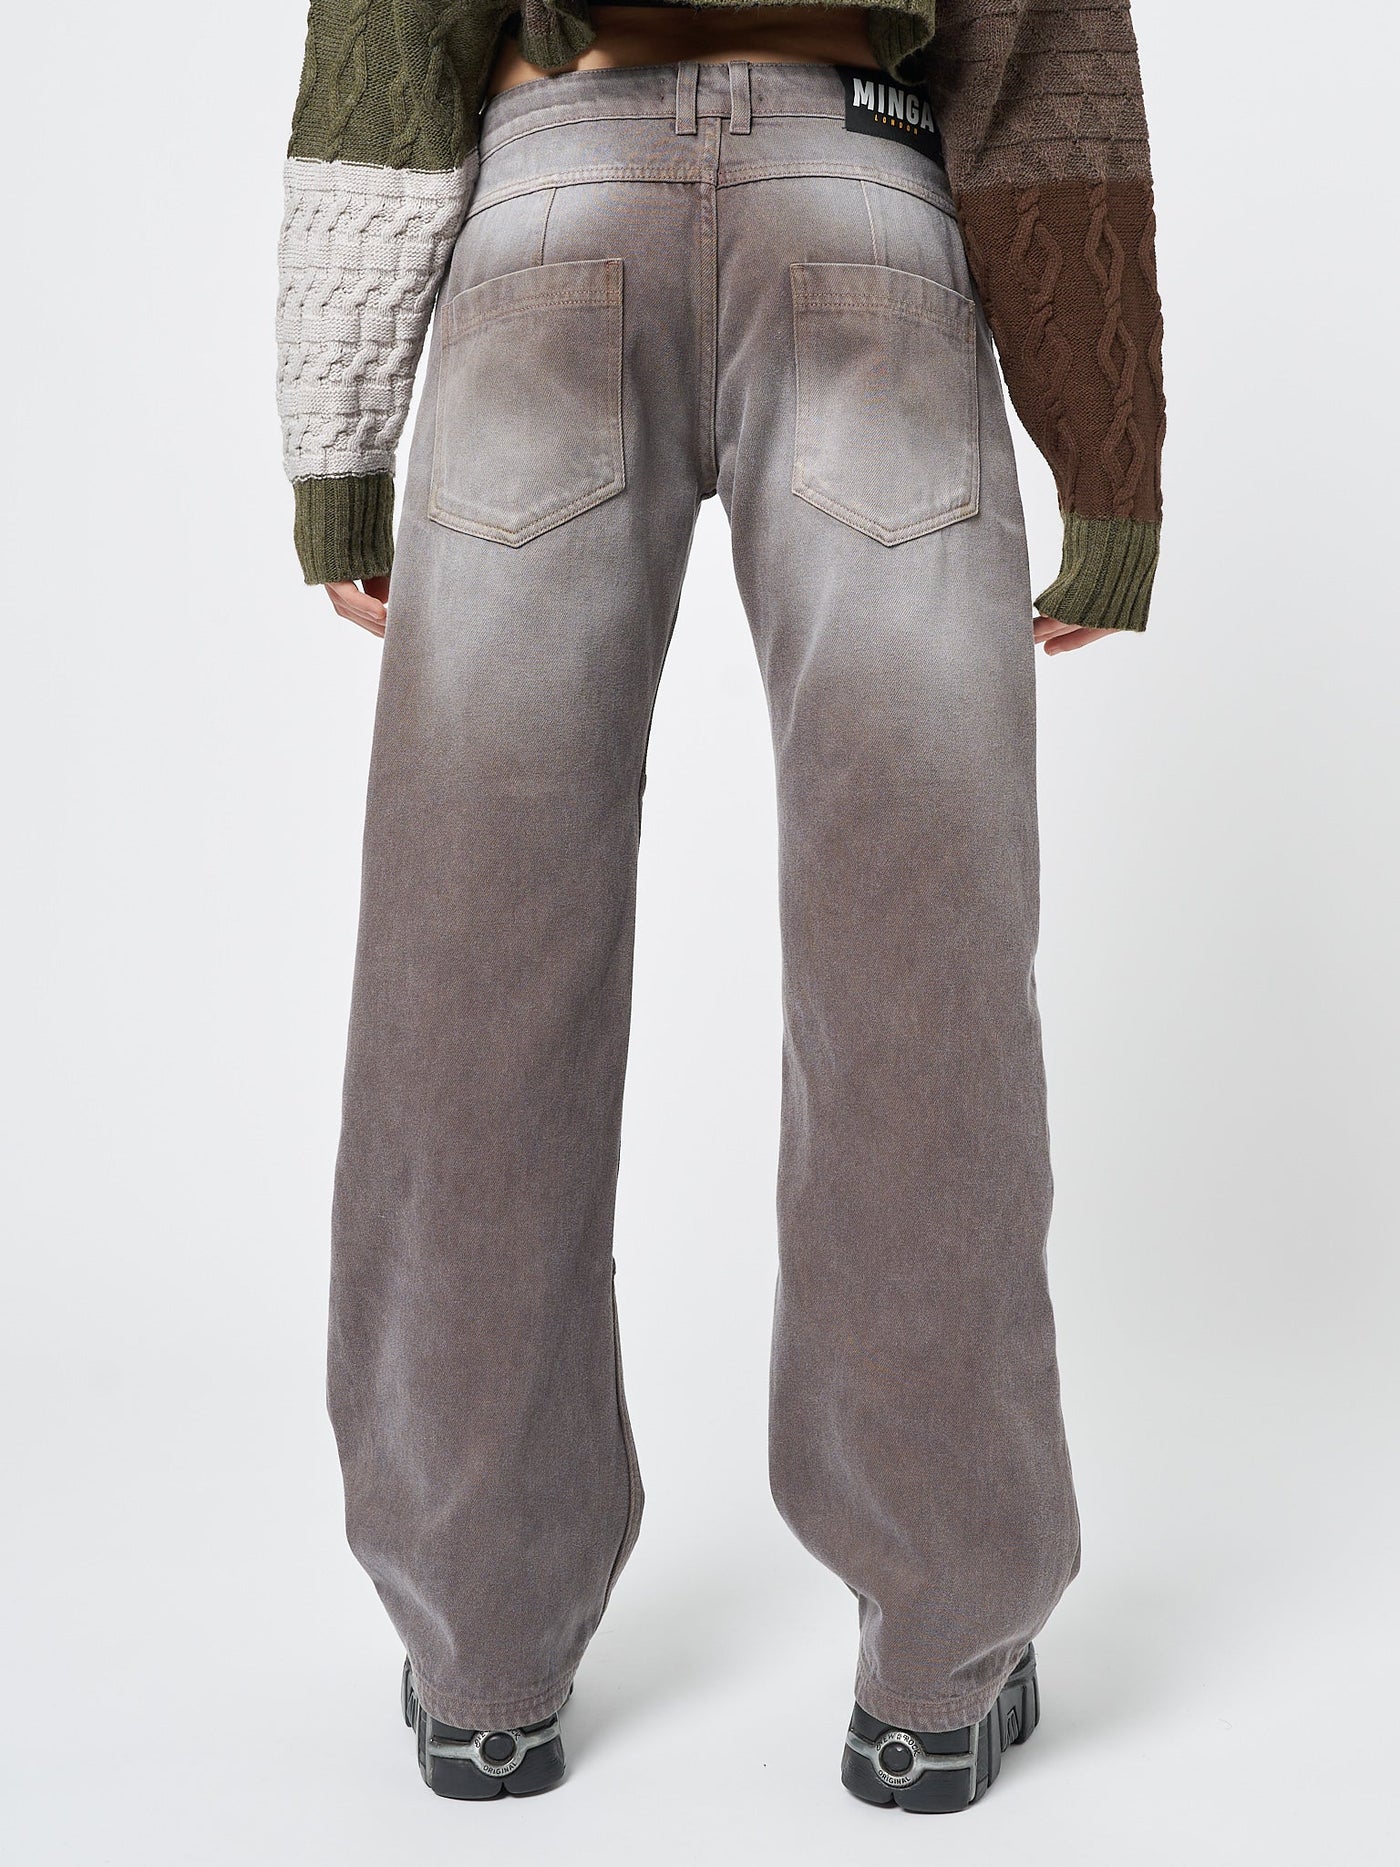 Brew Washed Brown Straight Jeans - Minga  US